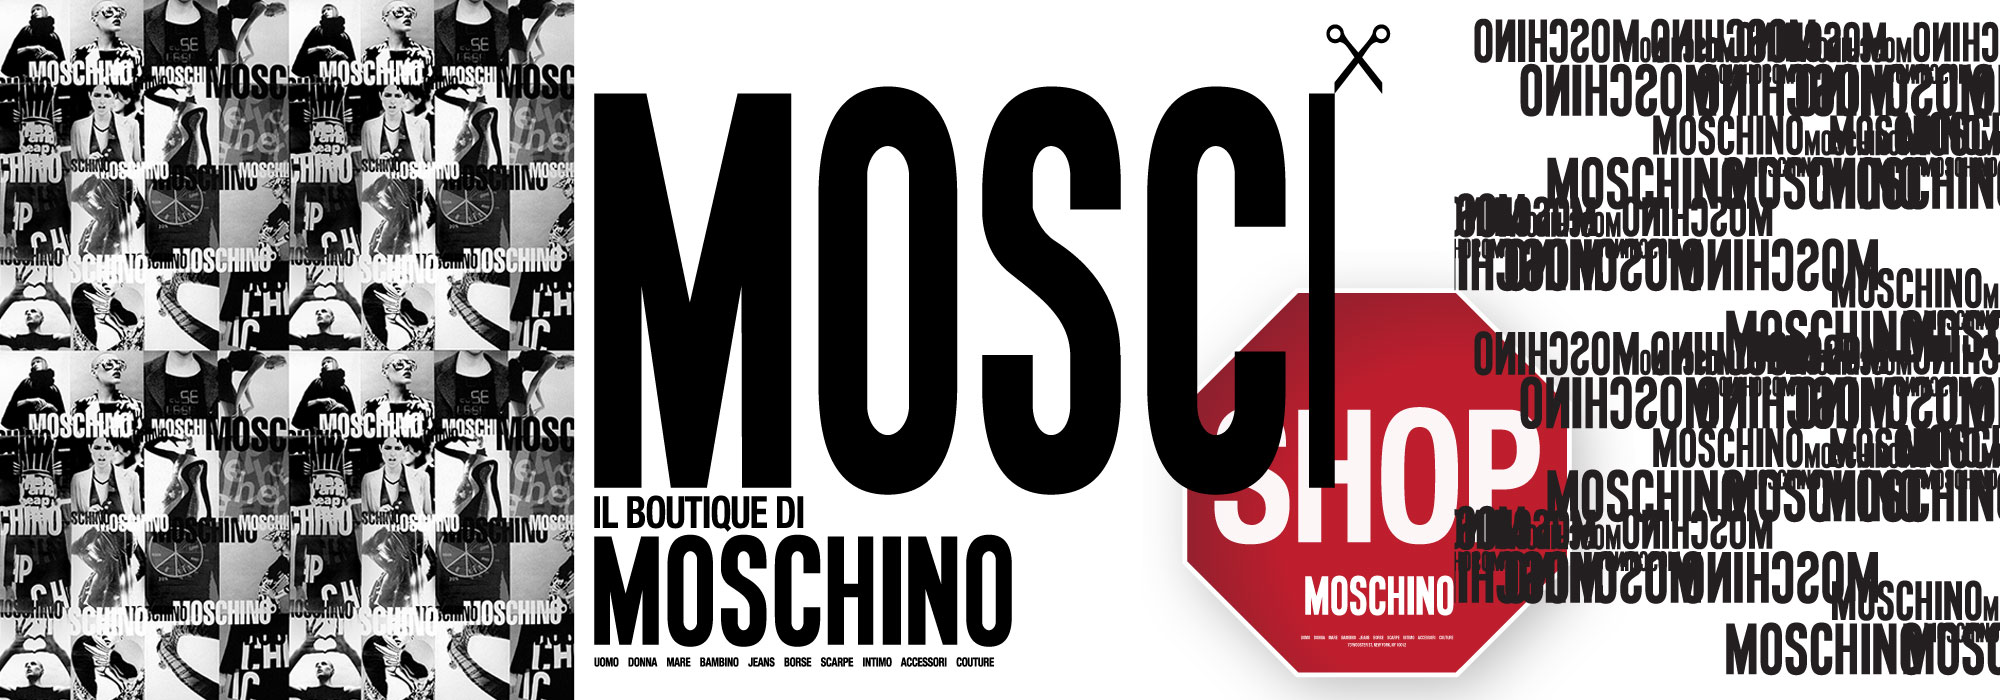 Moschino branding and packaging designed by MPAKT